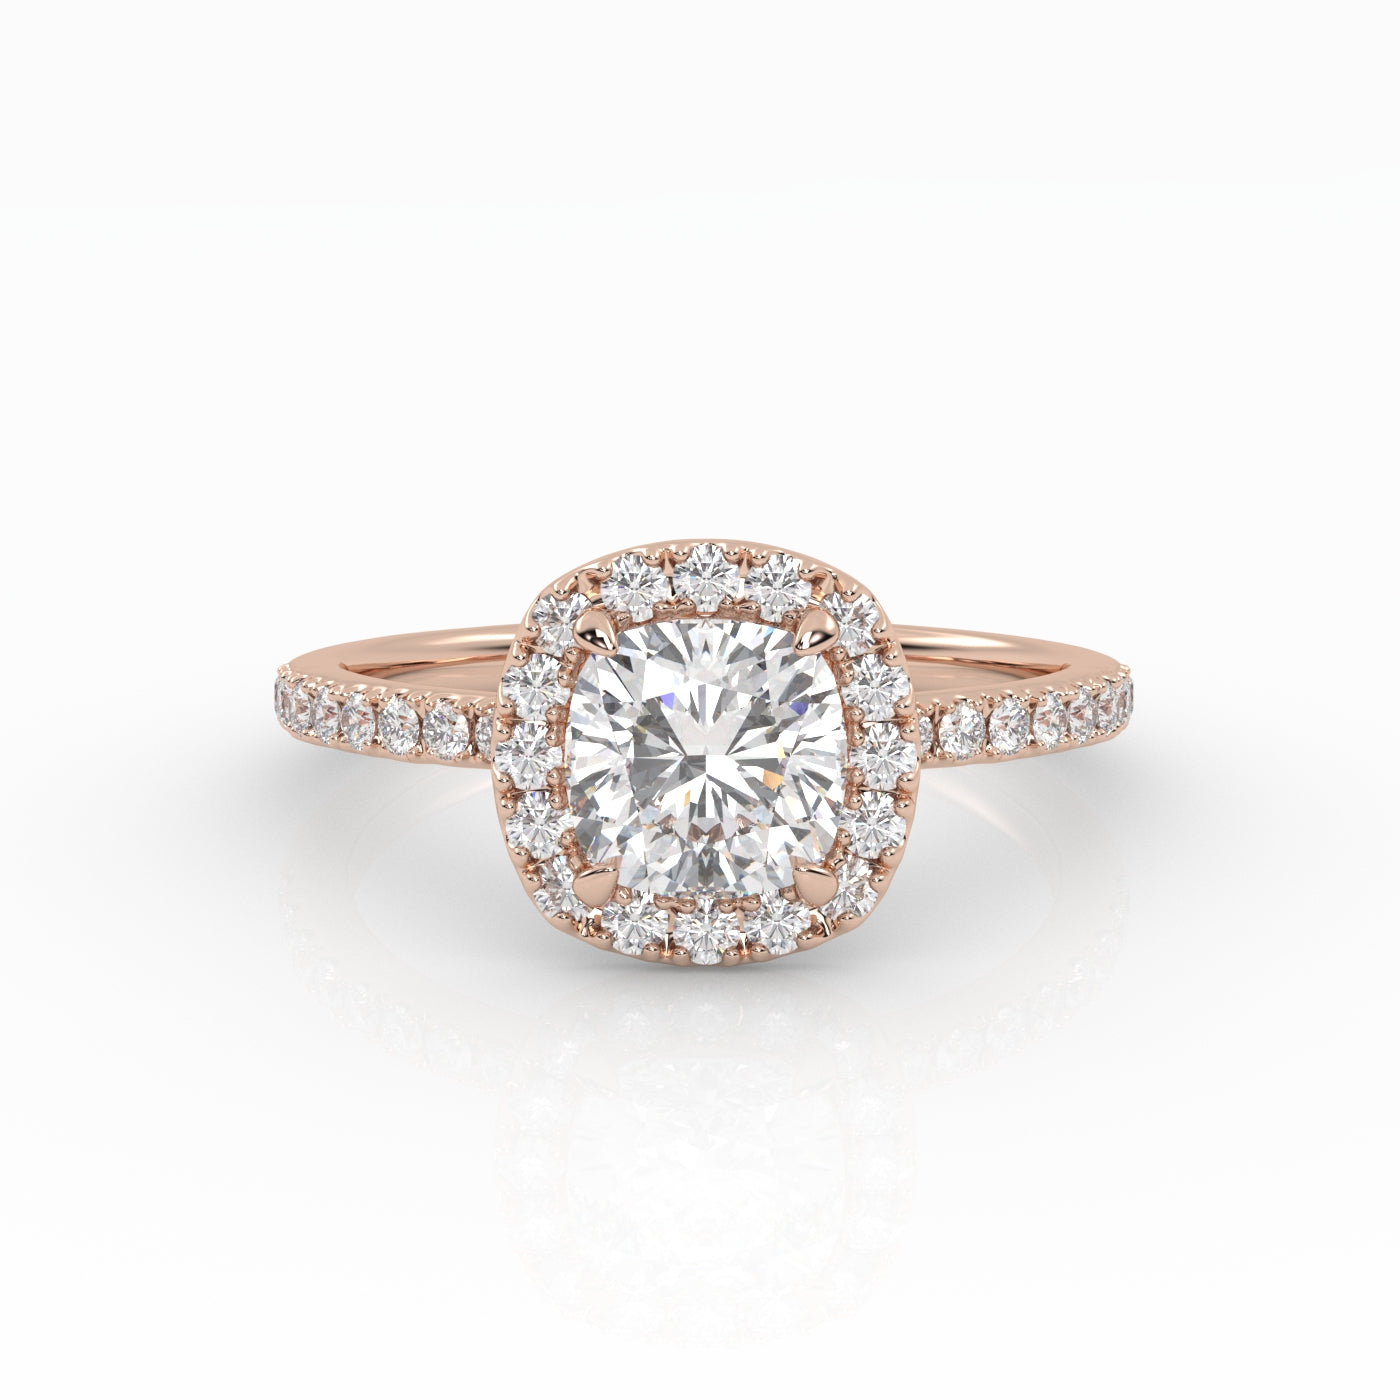 A refined cushion-cut diamond with Halo in a rose gold pavé band setting.